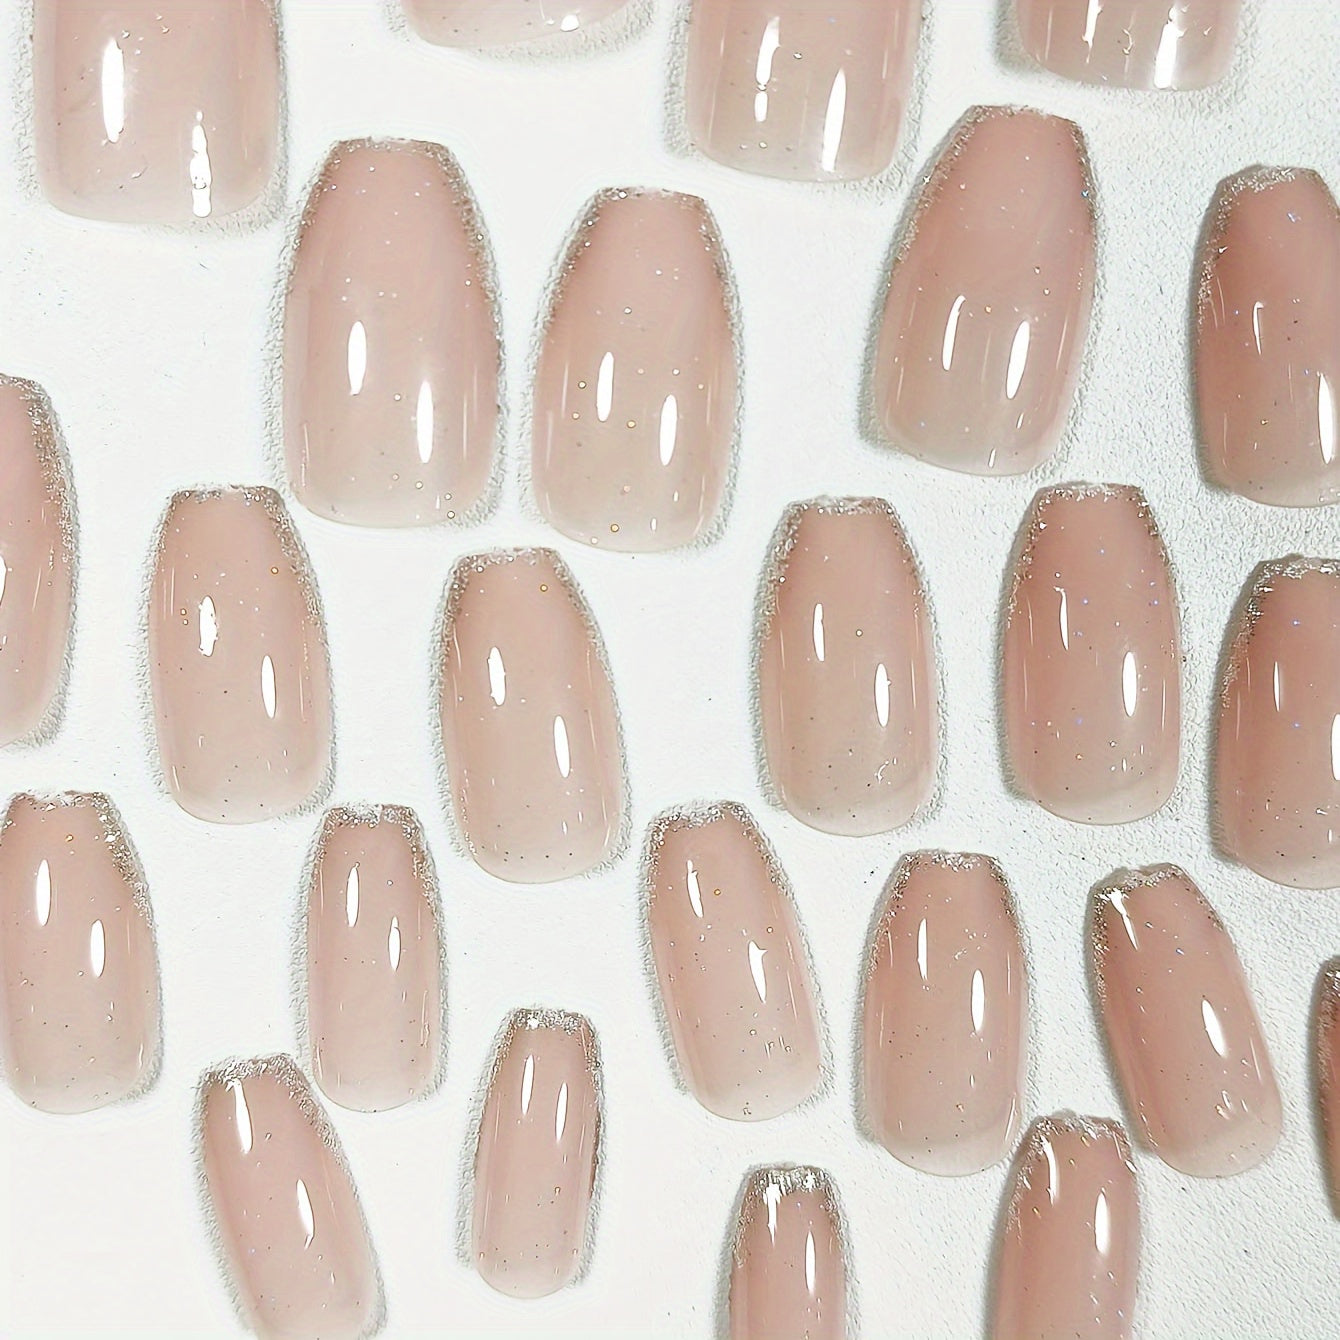 Chic Glossy Nude Press-On Nails with Golden Glitter Edge - 24pcs French Style Full Cover Set